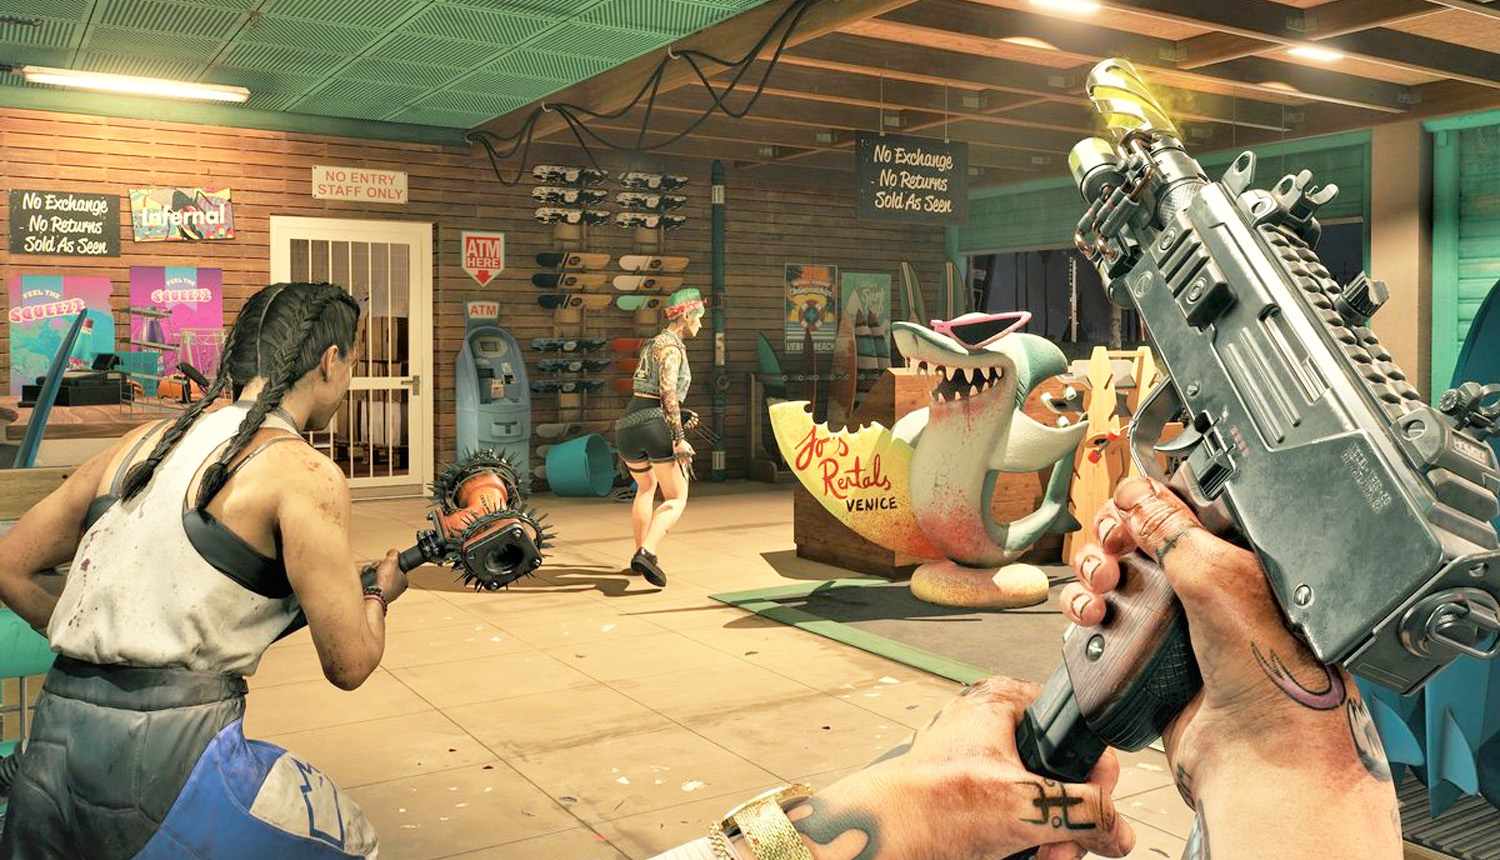 How Well Does Dead Island 2 Play On Steam Deck? 